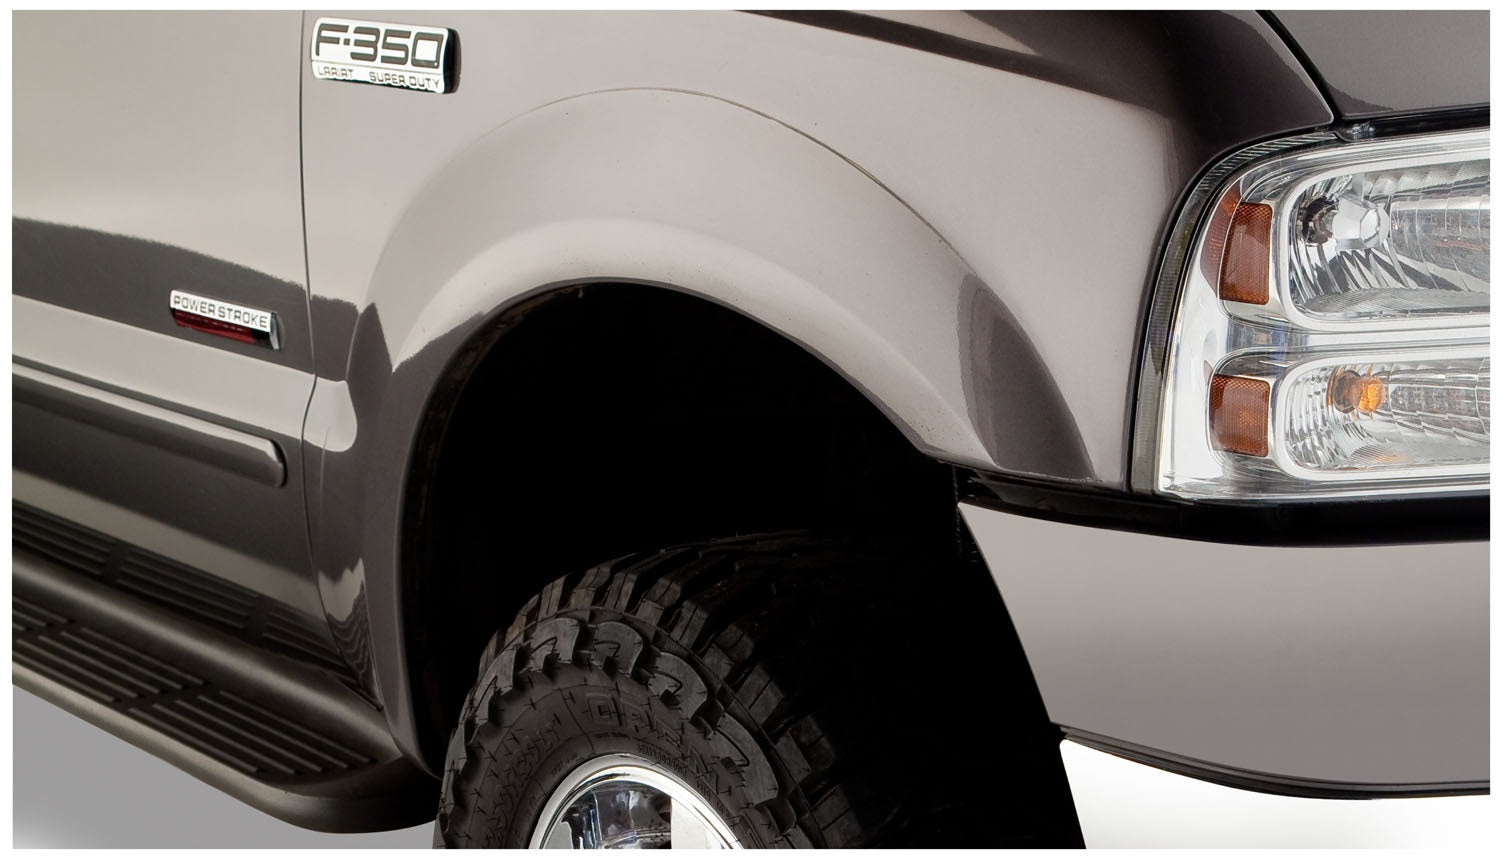 Bushwacker 20039-02 Black OE-Style Smooth Finish Front Fender Flares for 1999-2010 Ford F-250 Super Duty; 1999-2007 F-350 to F-550 Super Duty